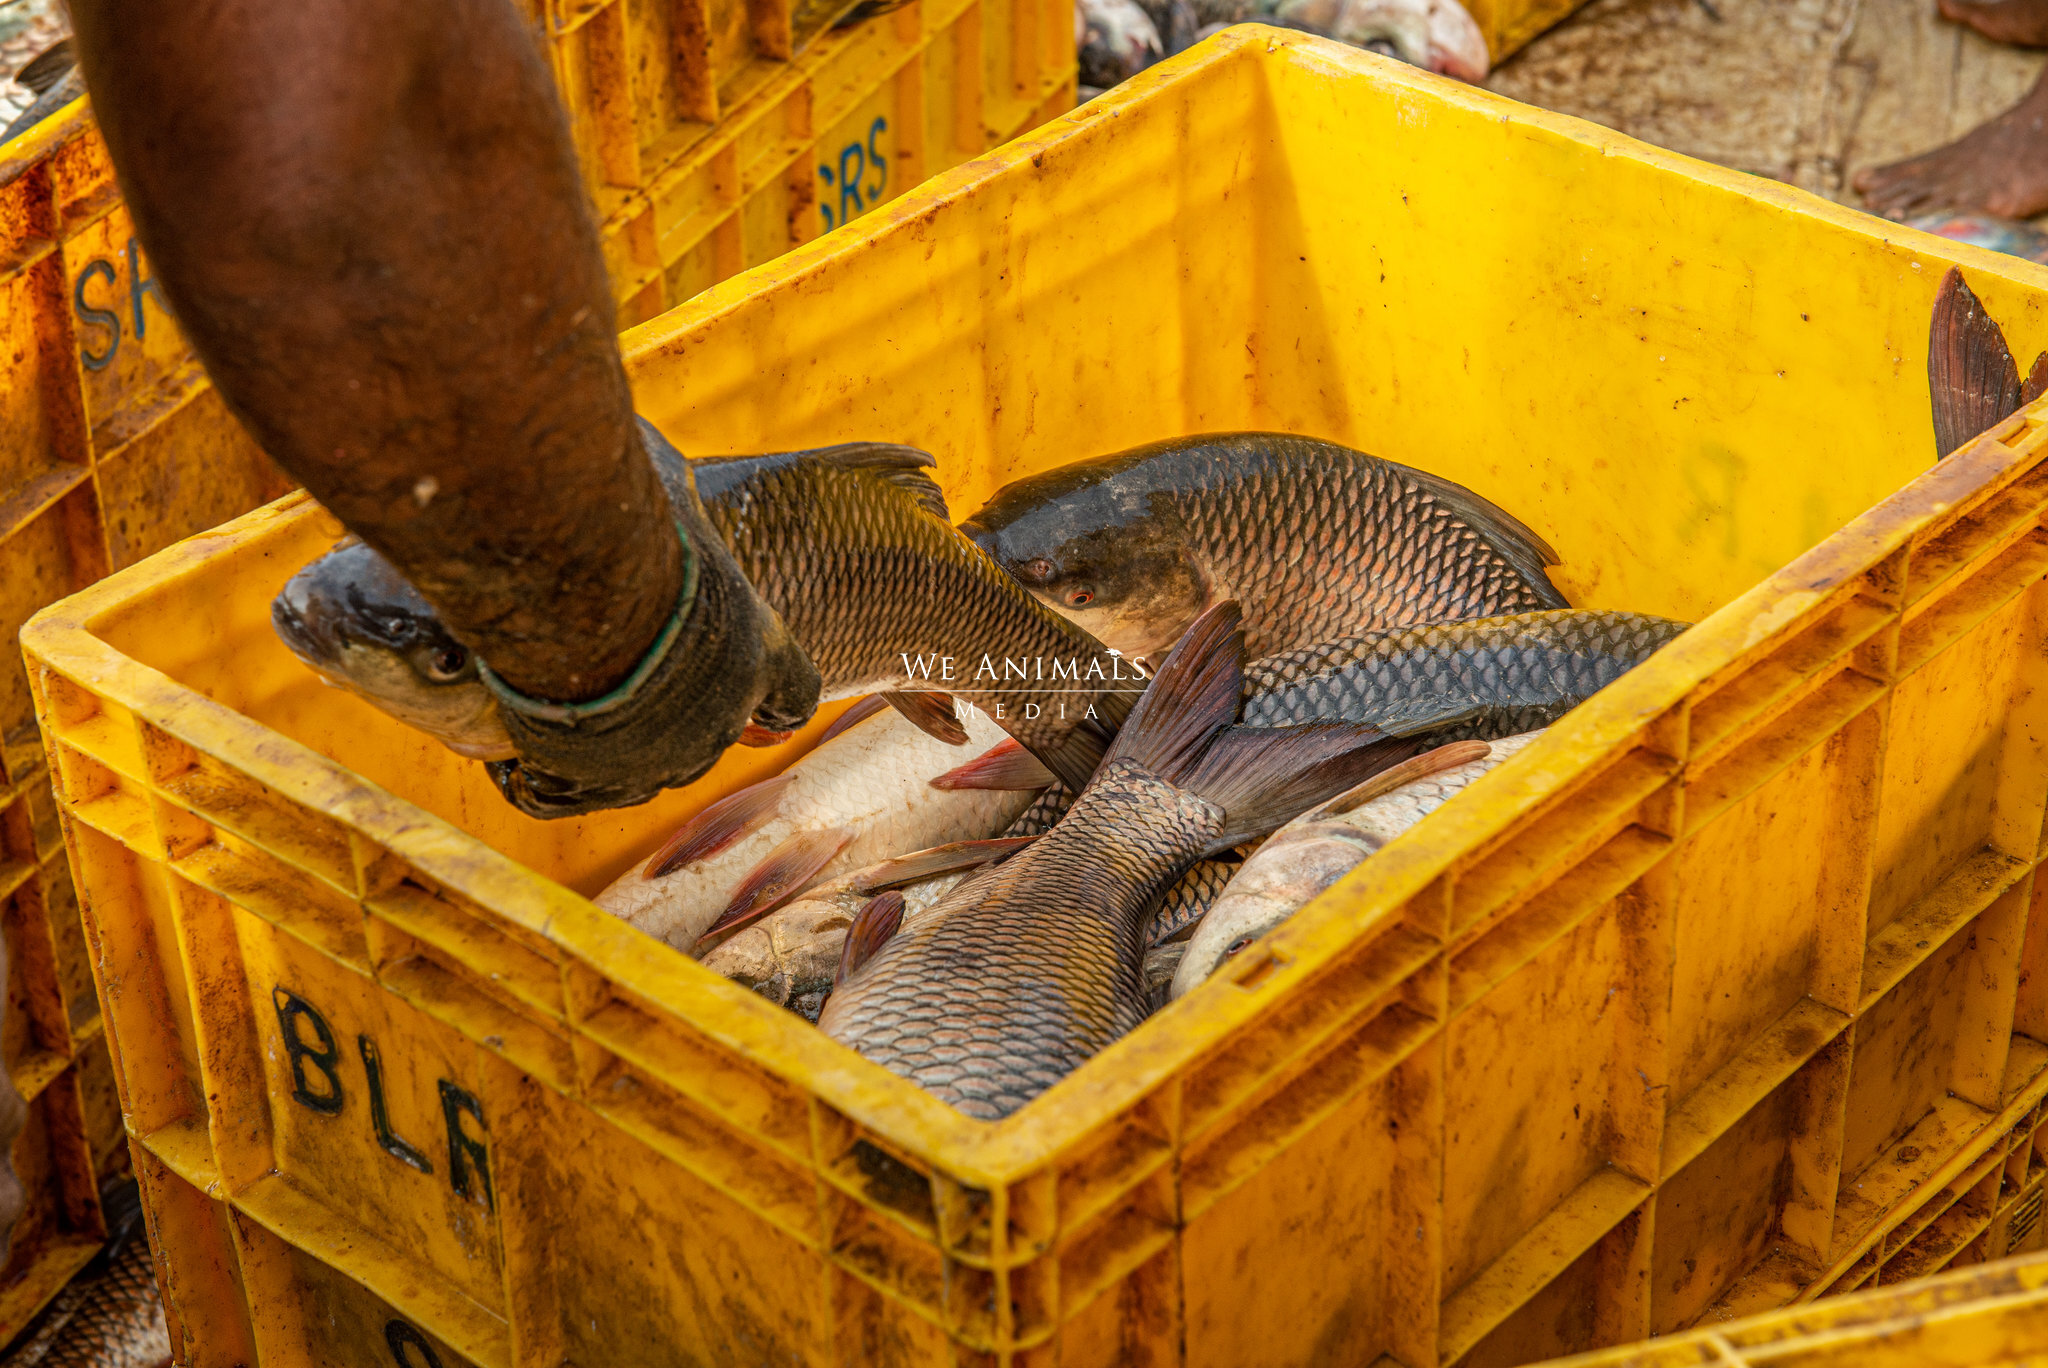 We Animals Media  A trader grasps a recently harvested live fish